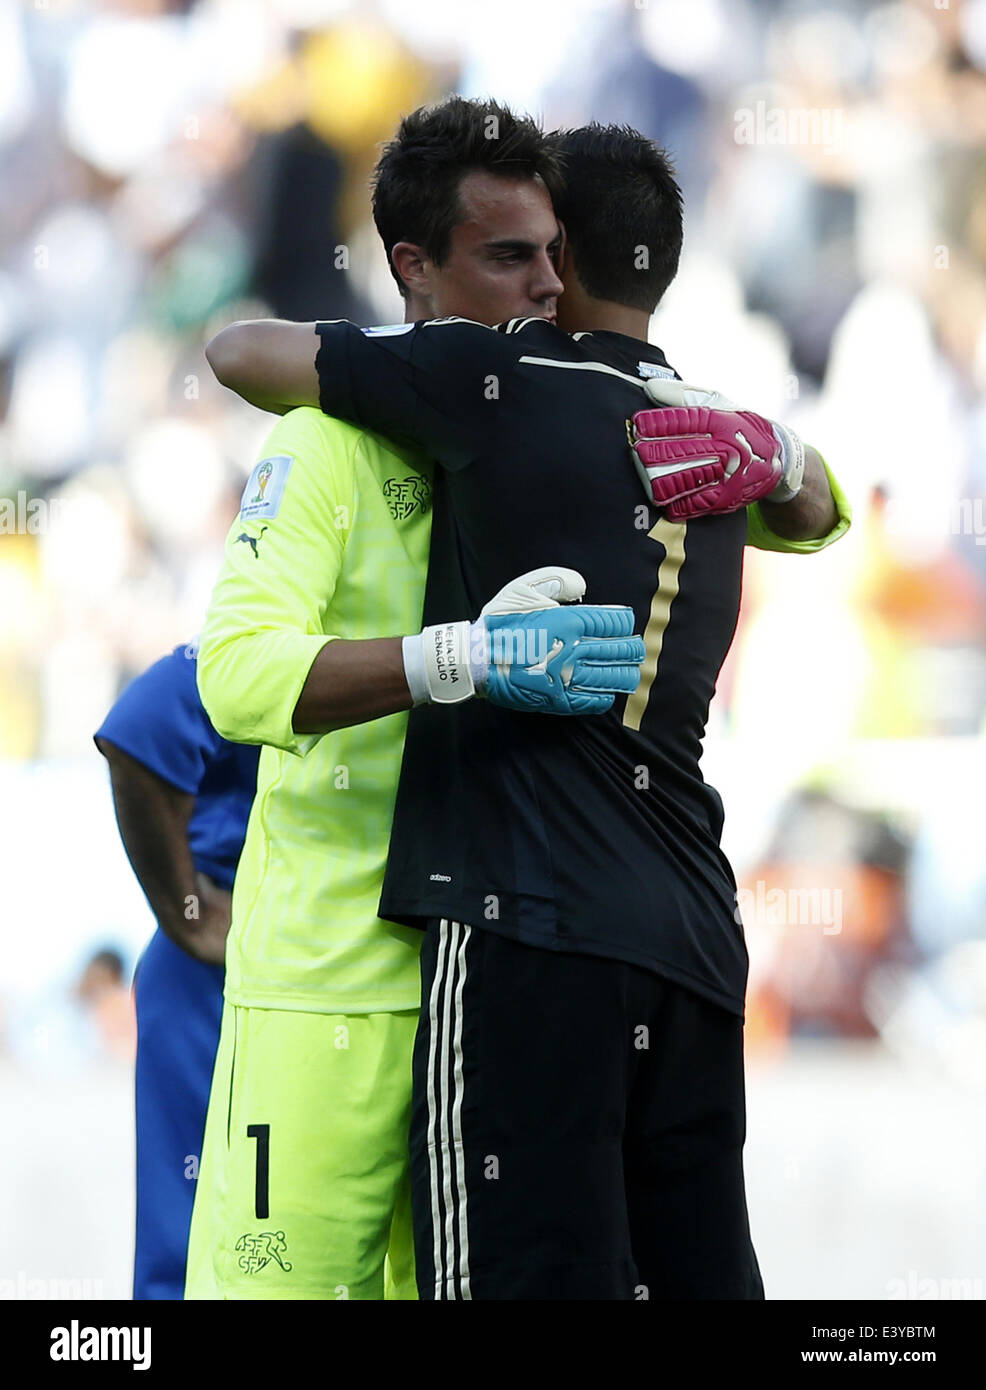 Sao Paulo, Brazil. 1st July, 2014. Switzerland's goalkeeper Diego Benaglio (L) embraces Argentina's goalkeeper Sergio Romero after a Round of 16 match between Argentina and Switzerland of 2014 FIFA World Cup at the Arena de Sao Paulo Stadium in Sao Paulo, Brazil, on July 1, 2014. Argentina won 1-0 over Switzerland after 120 minutes and qualified for quarter-finals on Tuesday. Credit:  Wang Lili/Xinhua/Alamy Live News Stock Photo